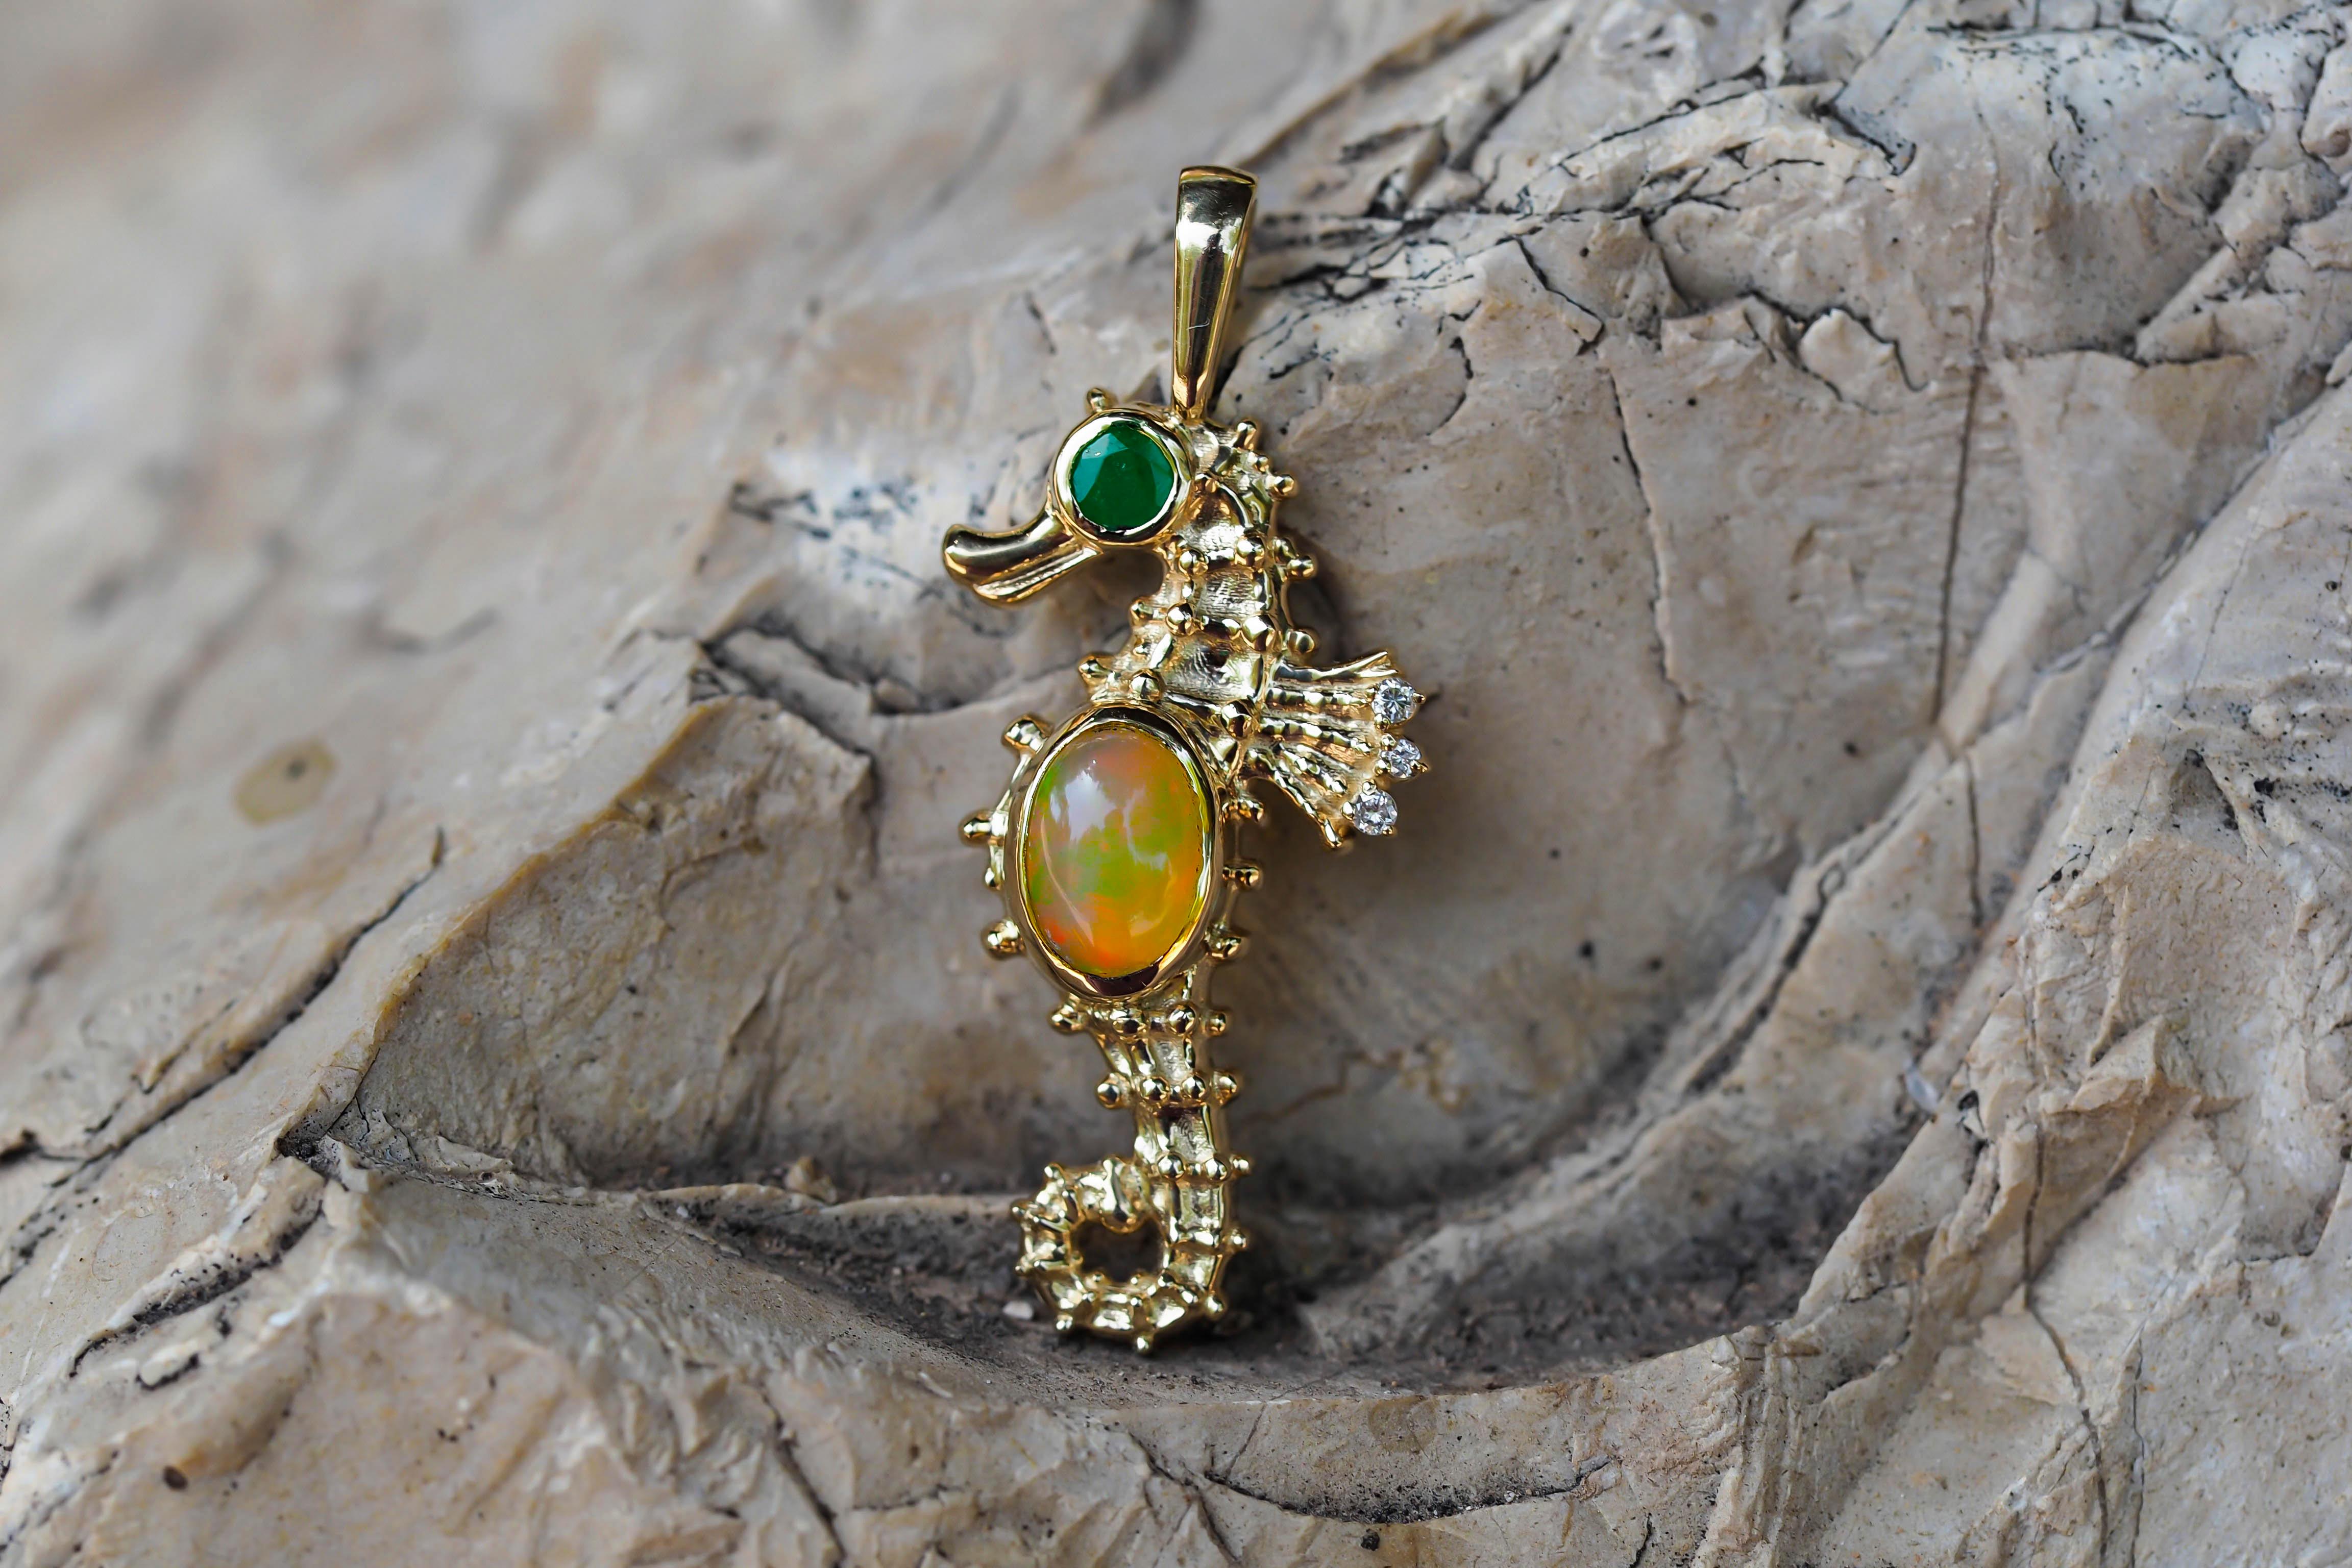 Seahorse pendant with opal. 
Multicolor Ethiopian Opal 14k gold pendant. Sea Animal Cute Horse Fish pendant. Sea, Beach Lover Pendant, Charm.

Metal: 14k gold
31x13.5 mm size
Weight 2.20 gr.

Gemstones:
Opal: oval cabochon shape, orange-yellow with